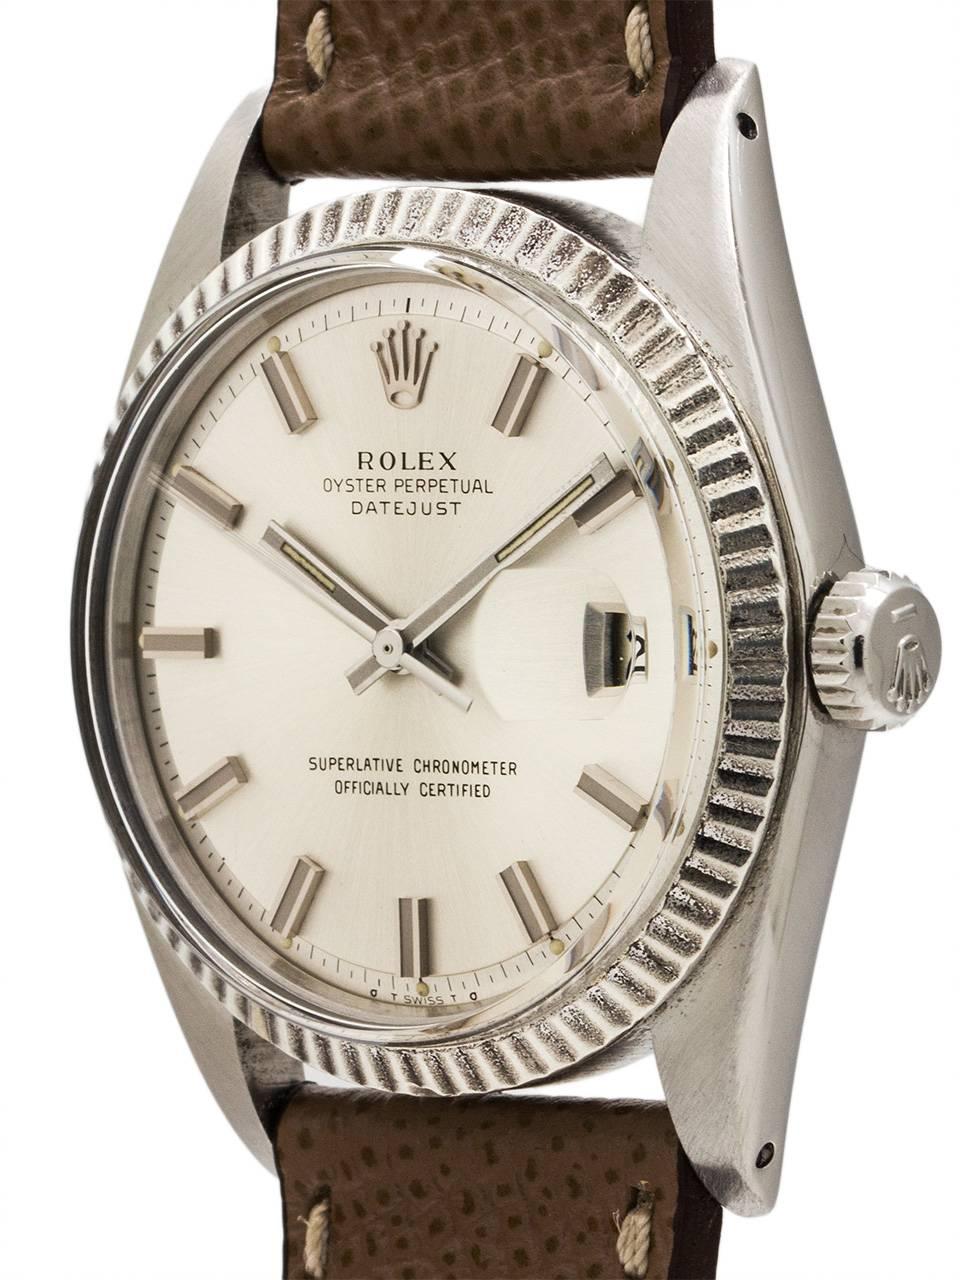 
Vintage man’s Rolex stainless steel Datejust ref# 1601 with serial number 3.8 million, circa 1974. Featuring a 36mm diameter Oyster case with 18K WG fluted bezel, acrylic crystal and signed Rolex crown. Featuring a lovely original silvered satin